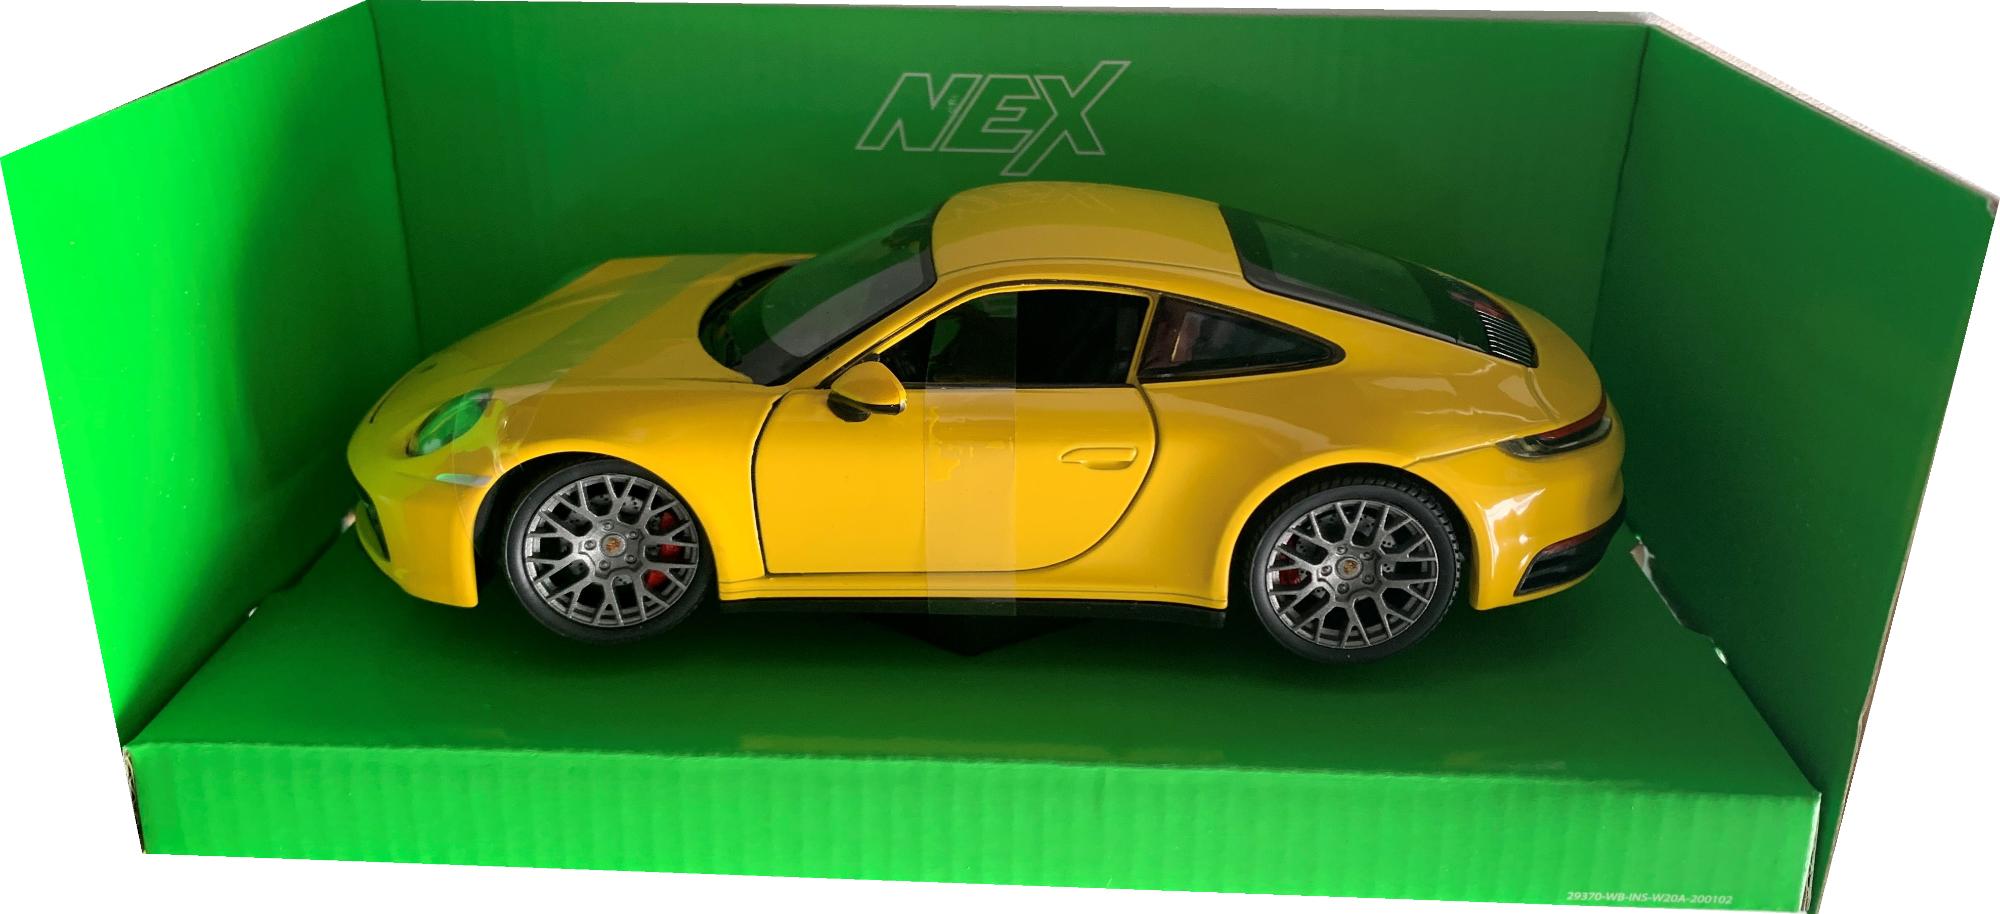 Porsche 911 Carrera 4S in yellow 1:24 scale model from Welly